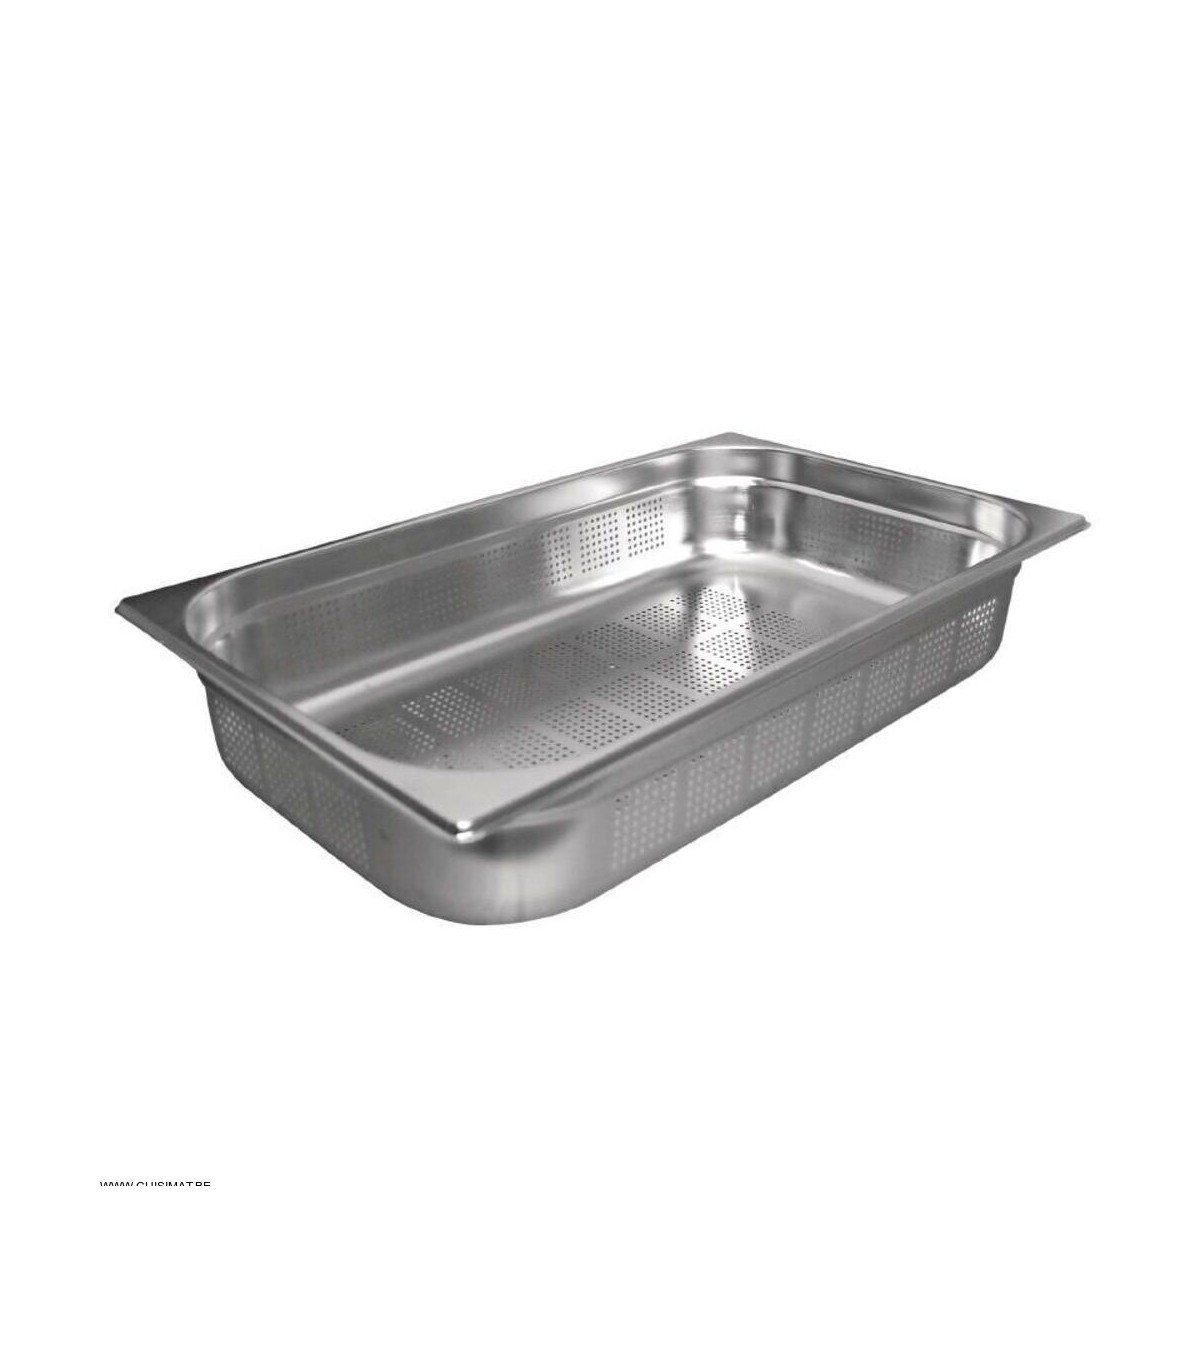 GN 1/1 PERFORE (325 * 530MM) 65 MM  VOGUE dans BACS GASTRONORM ANTI-ADHESIF